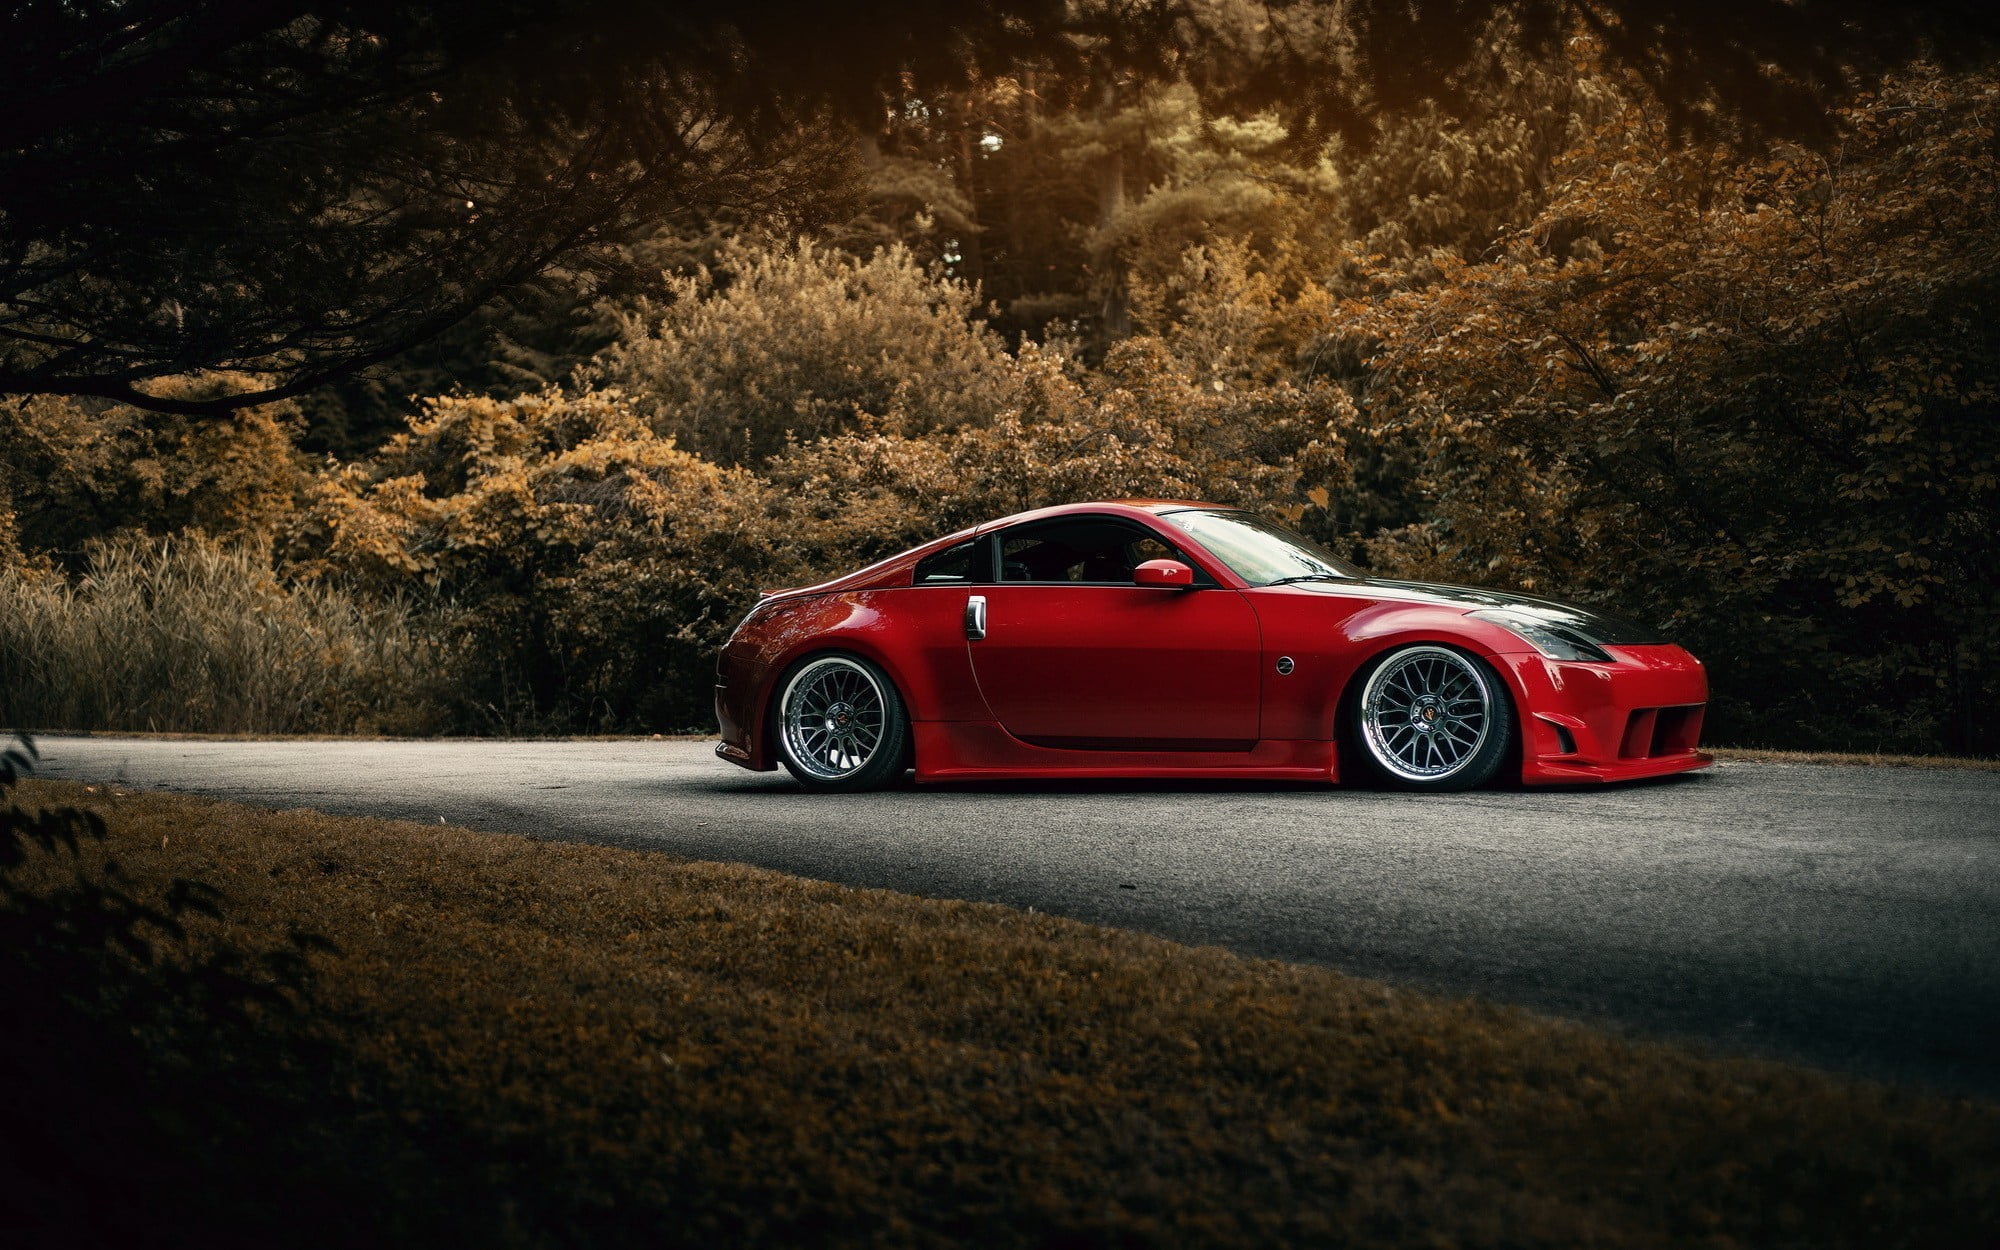 red coupe, car, JDM, Nissan, Nissan 350Z